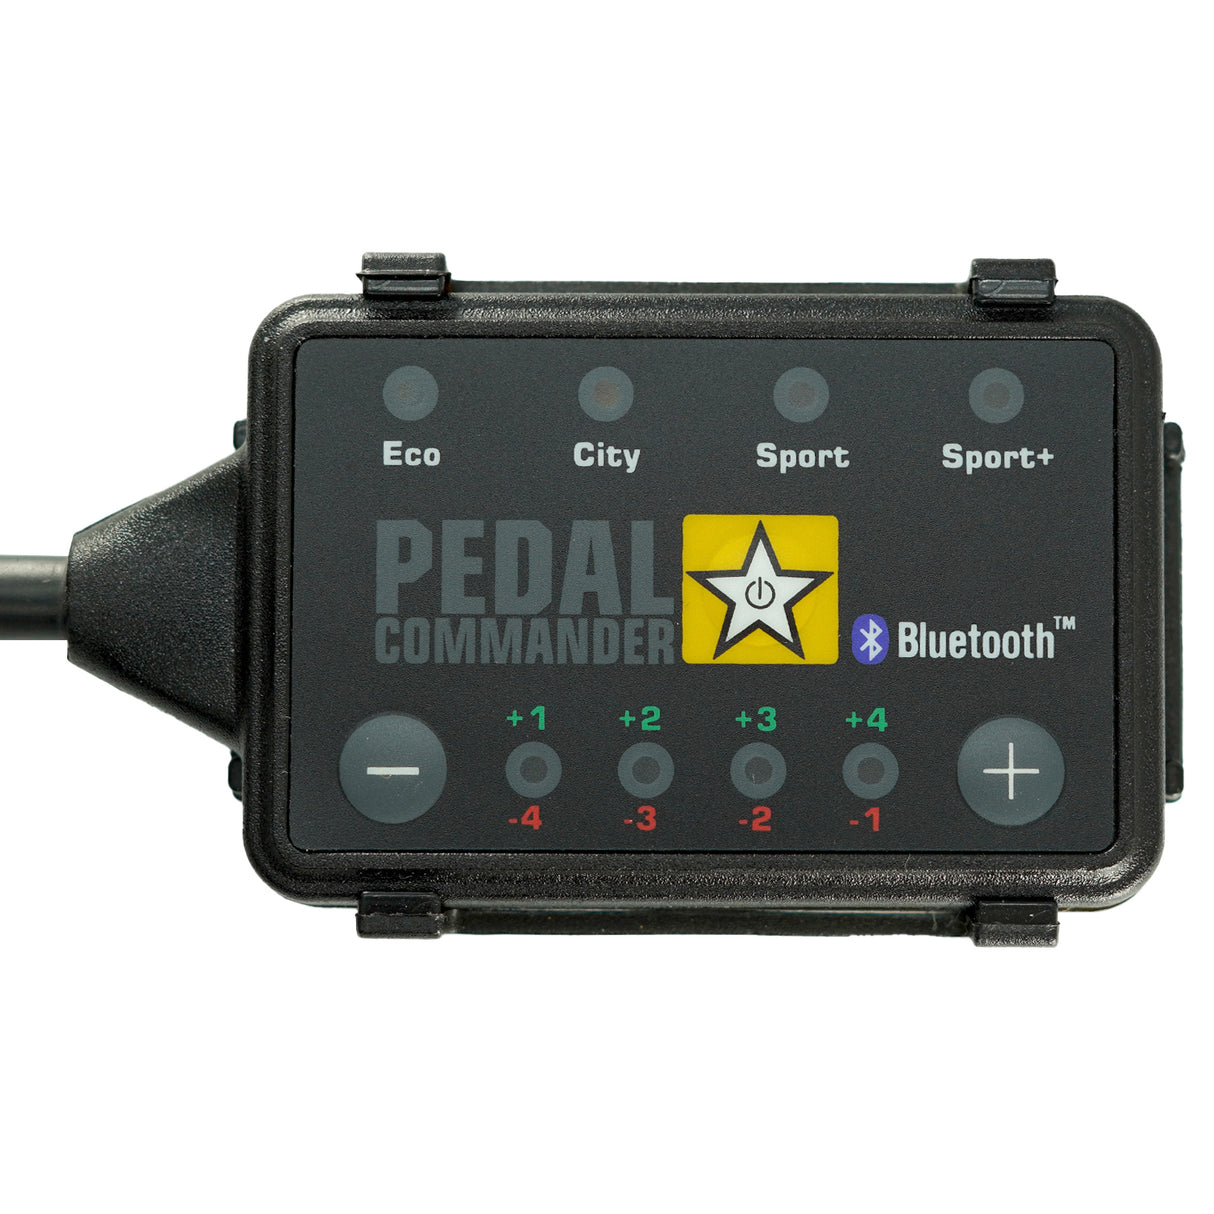 Pedal Commander 07-RAM-PM1-01 Pedal Commander Throttle Response Controller with Bluetooth Support - Roam Overland Outfitters